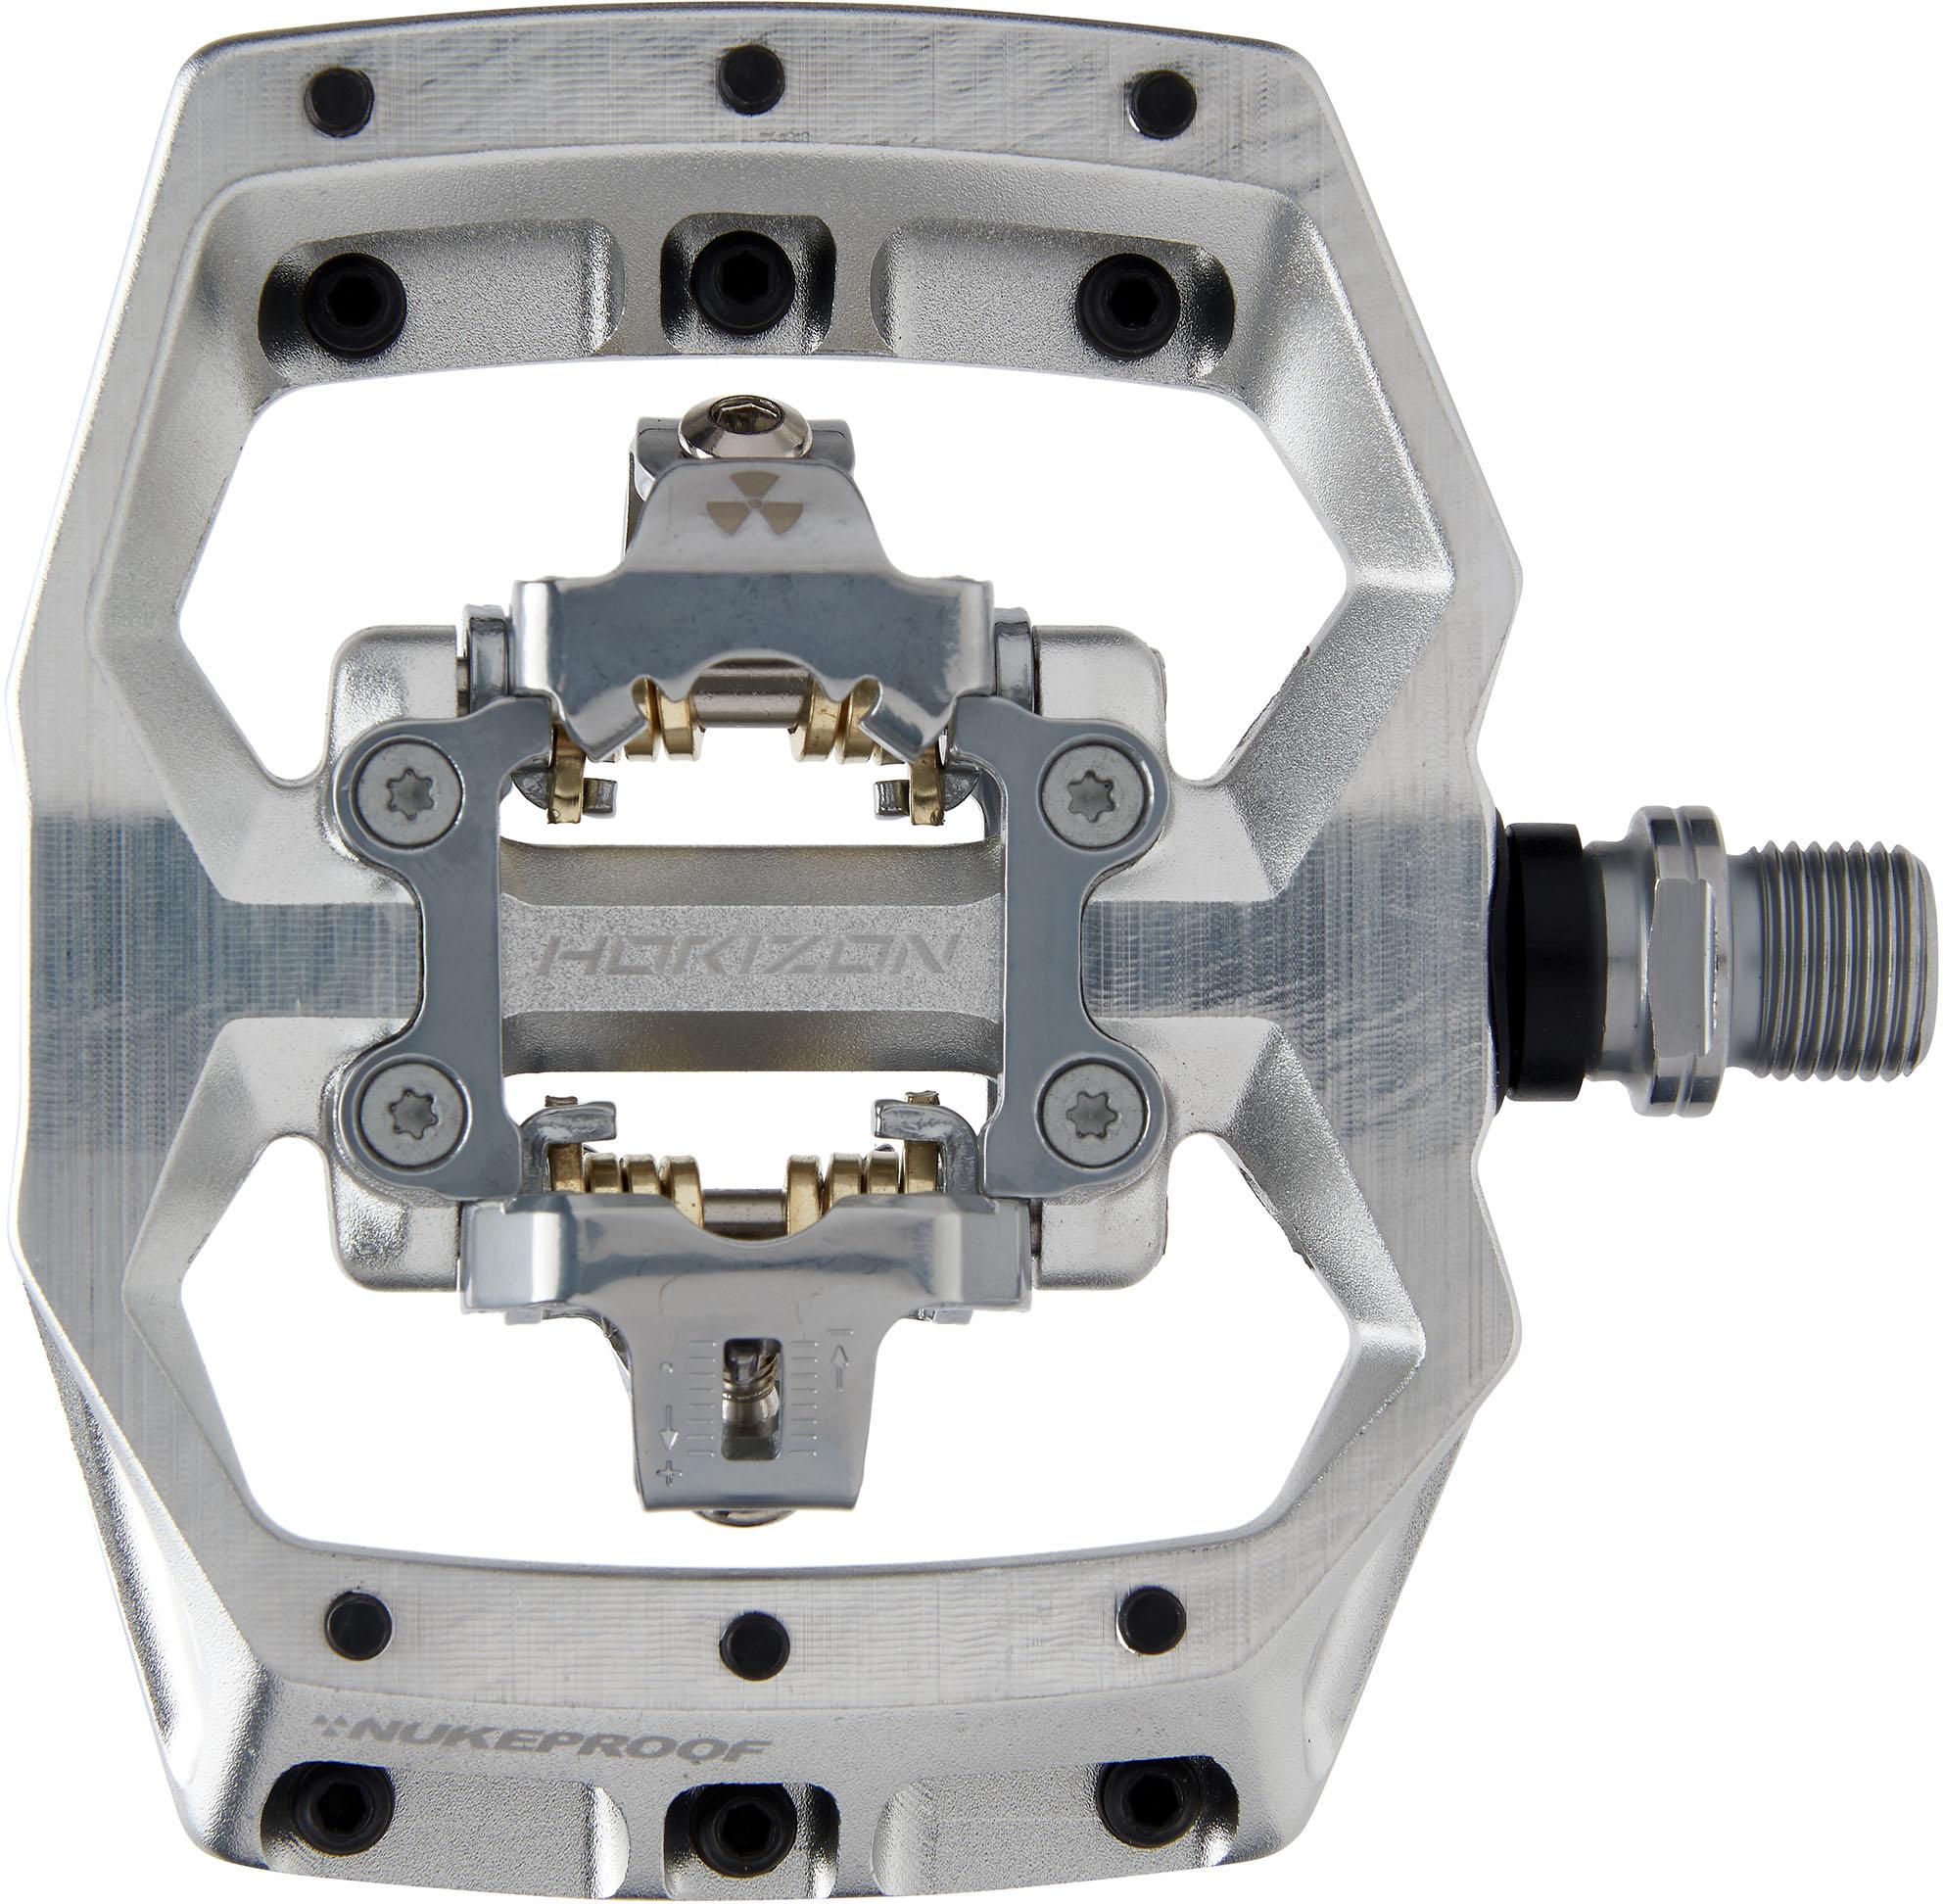 Nukeproof Horizon Cl Crmo Downhill Pedals  Silver